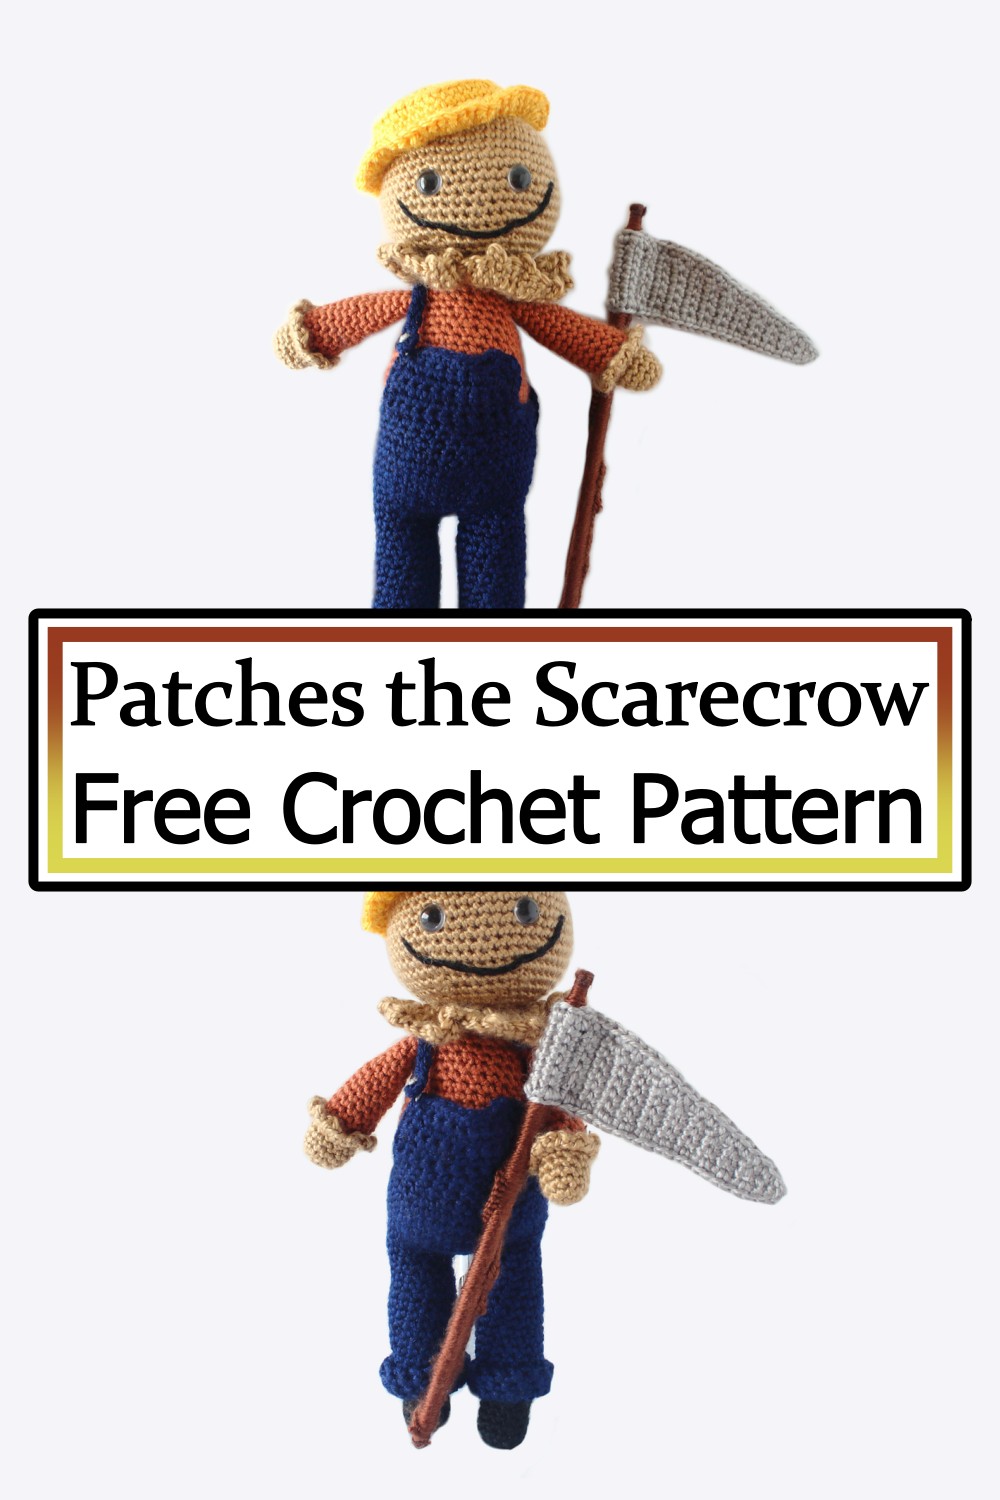 Patches the Scarecrow